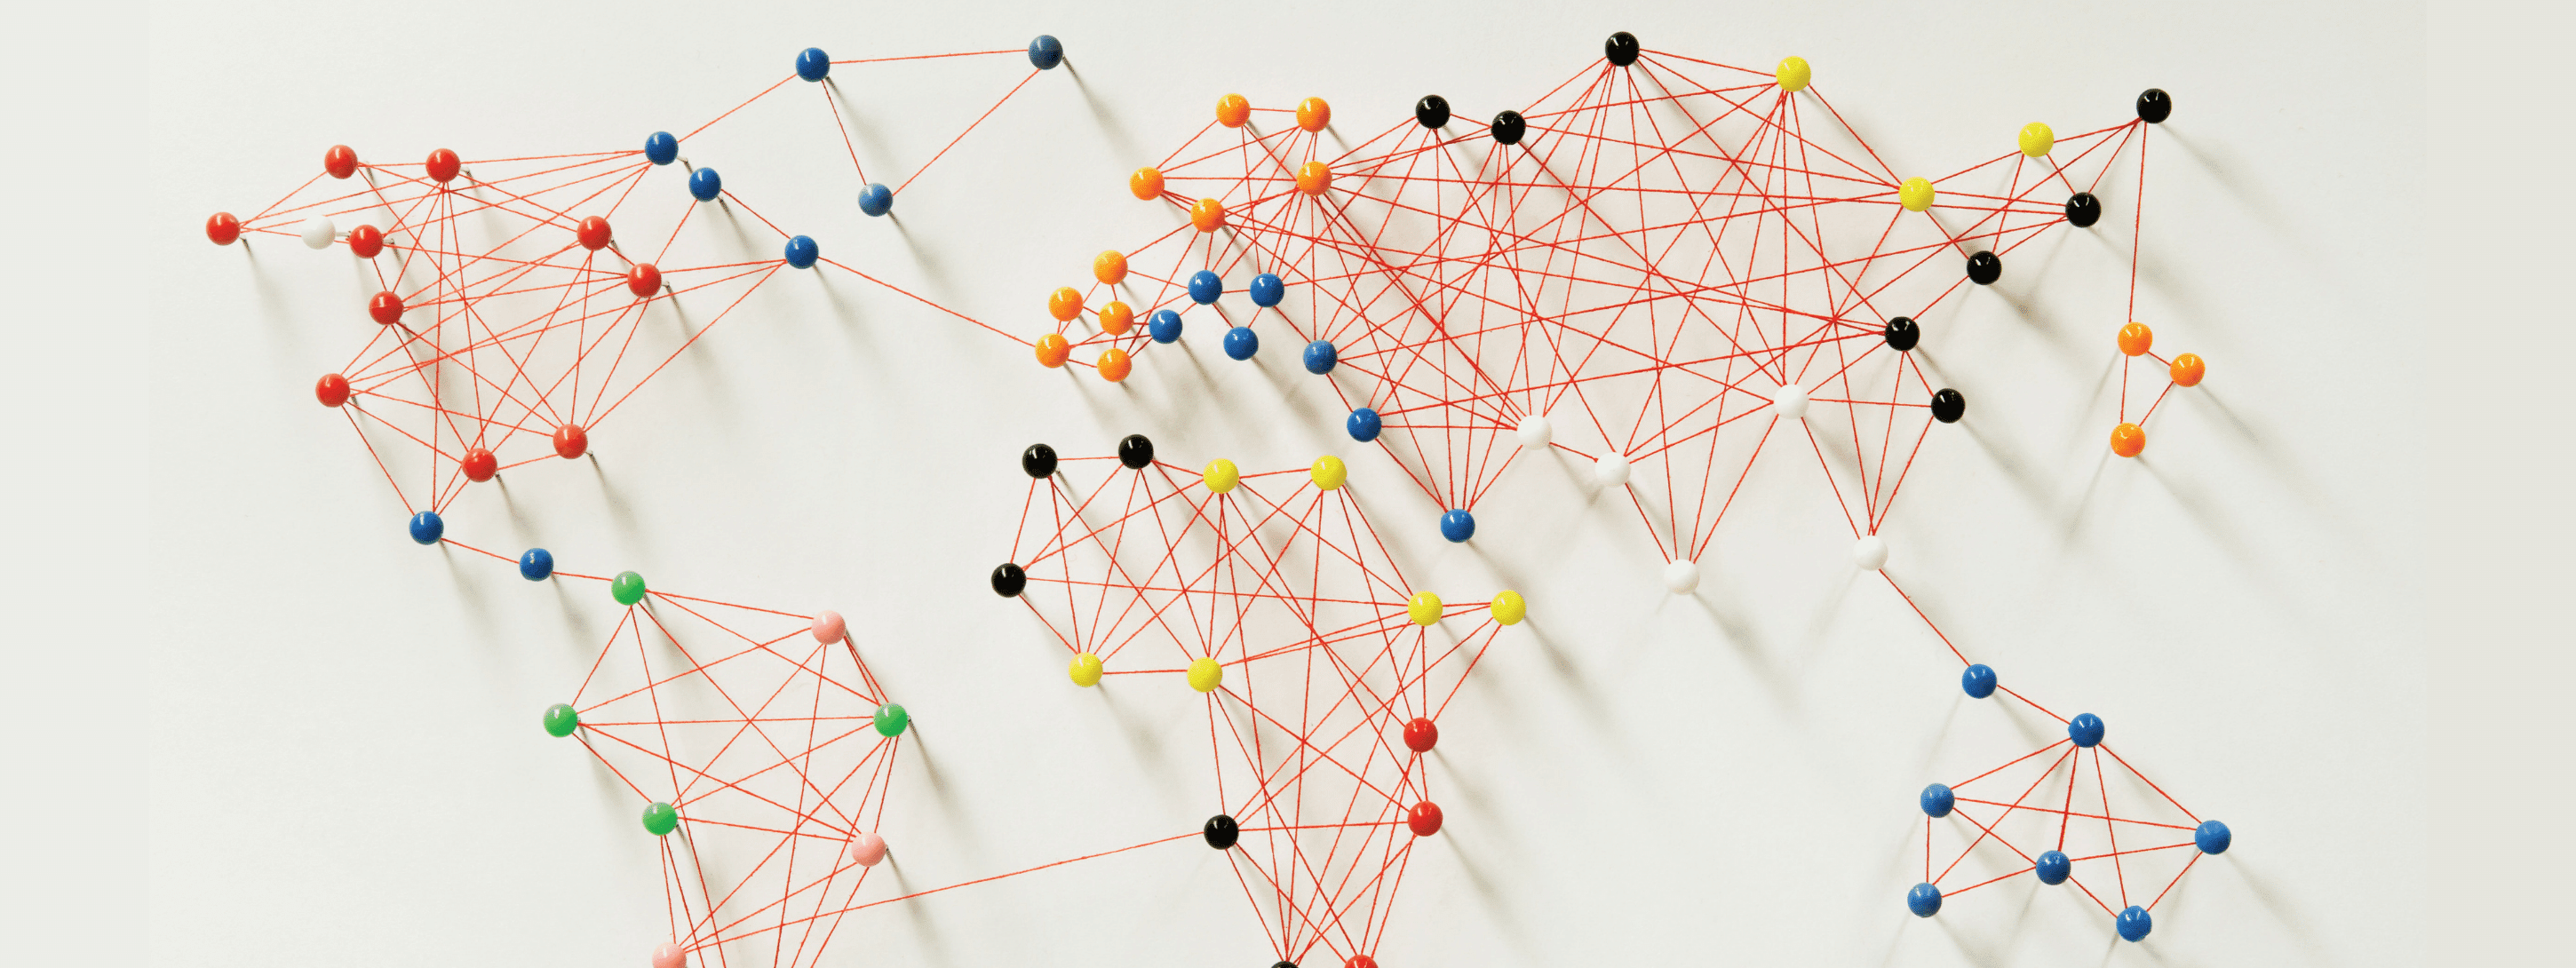 continents drawn with string and push pins